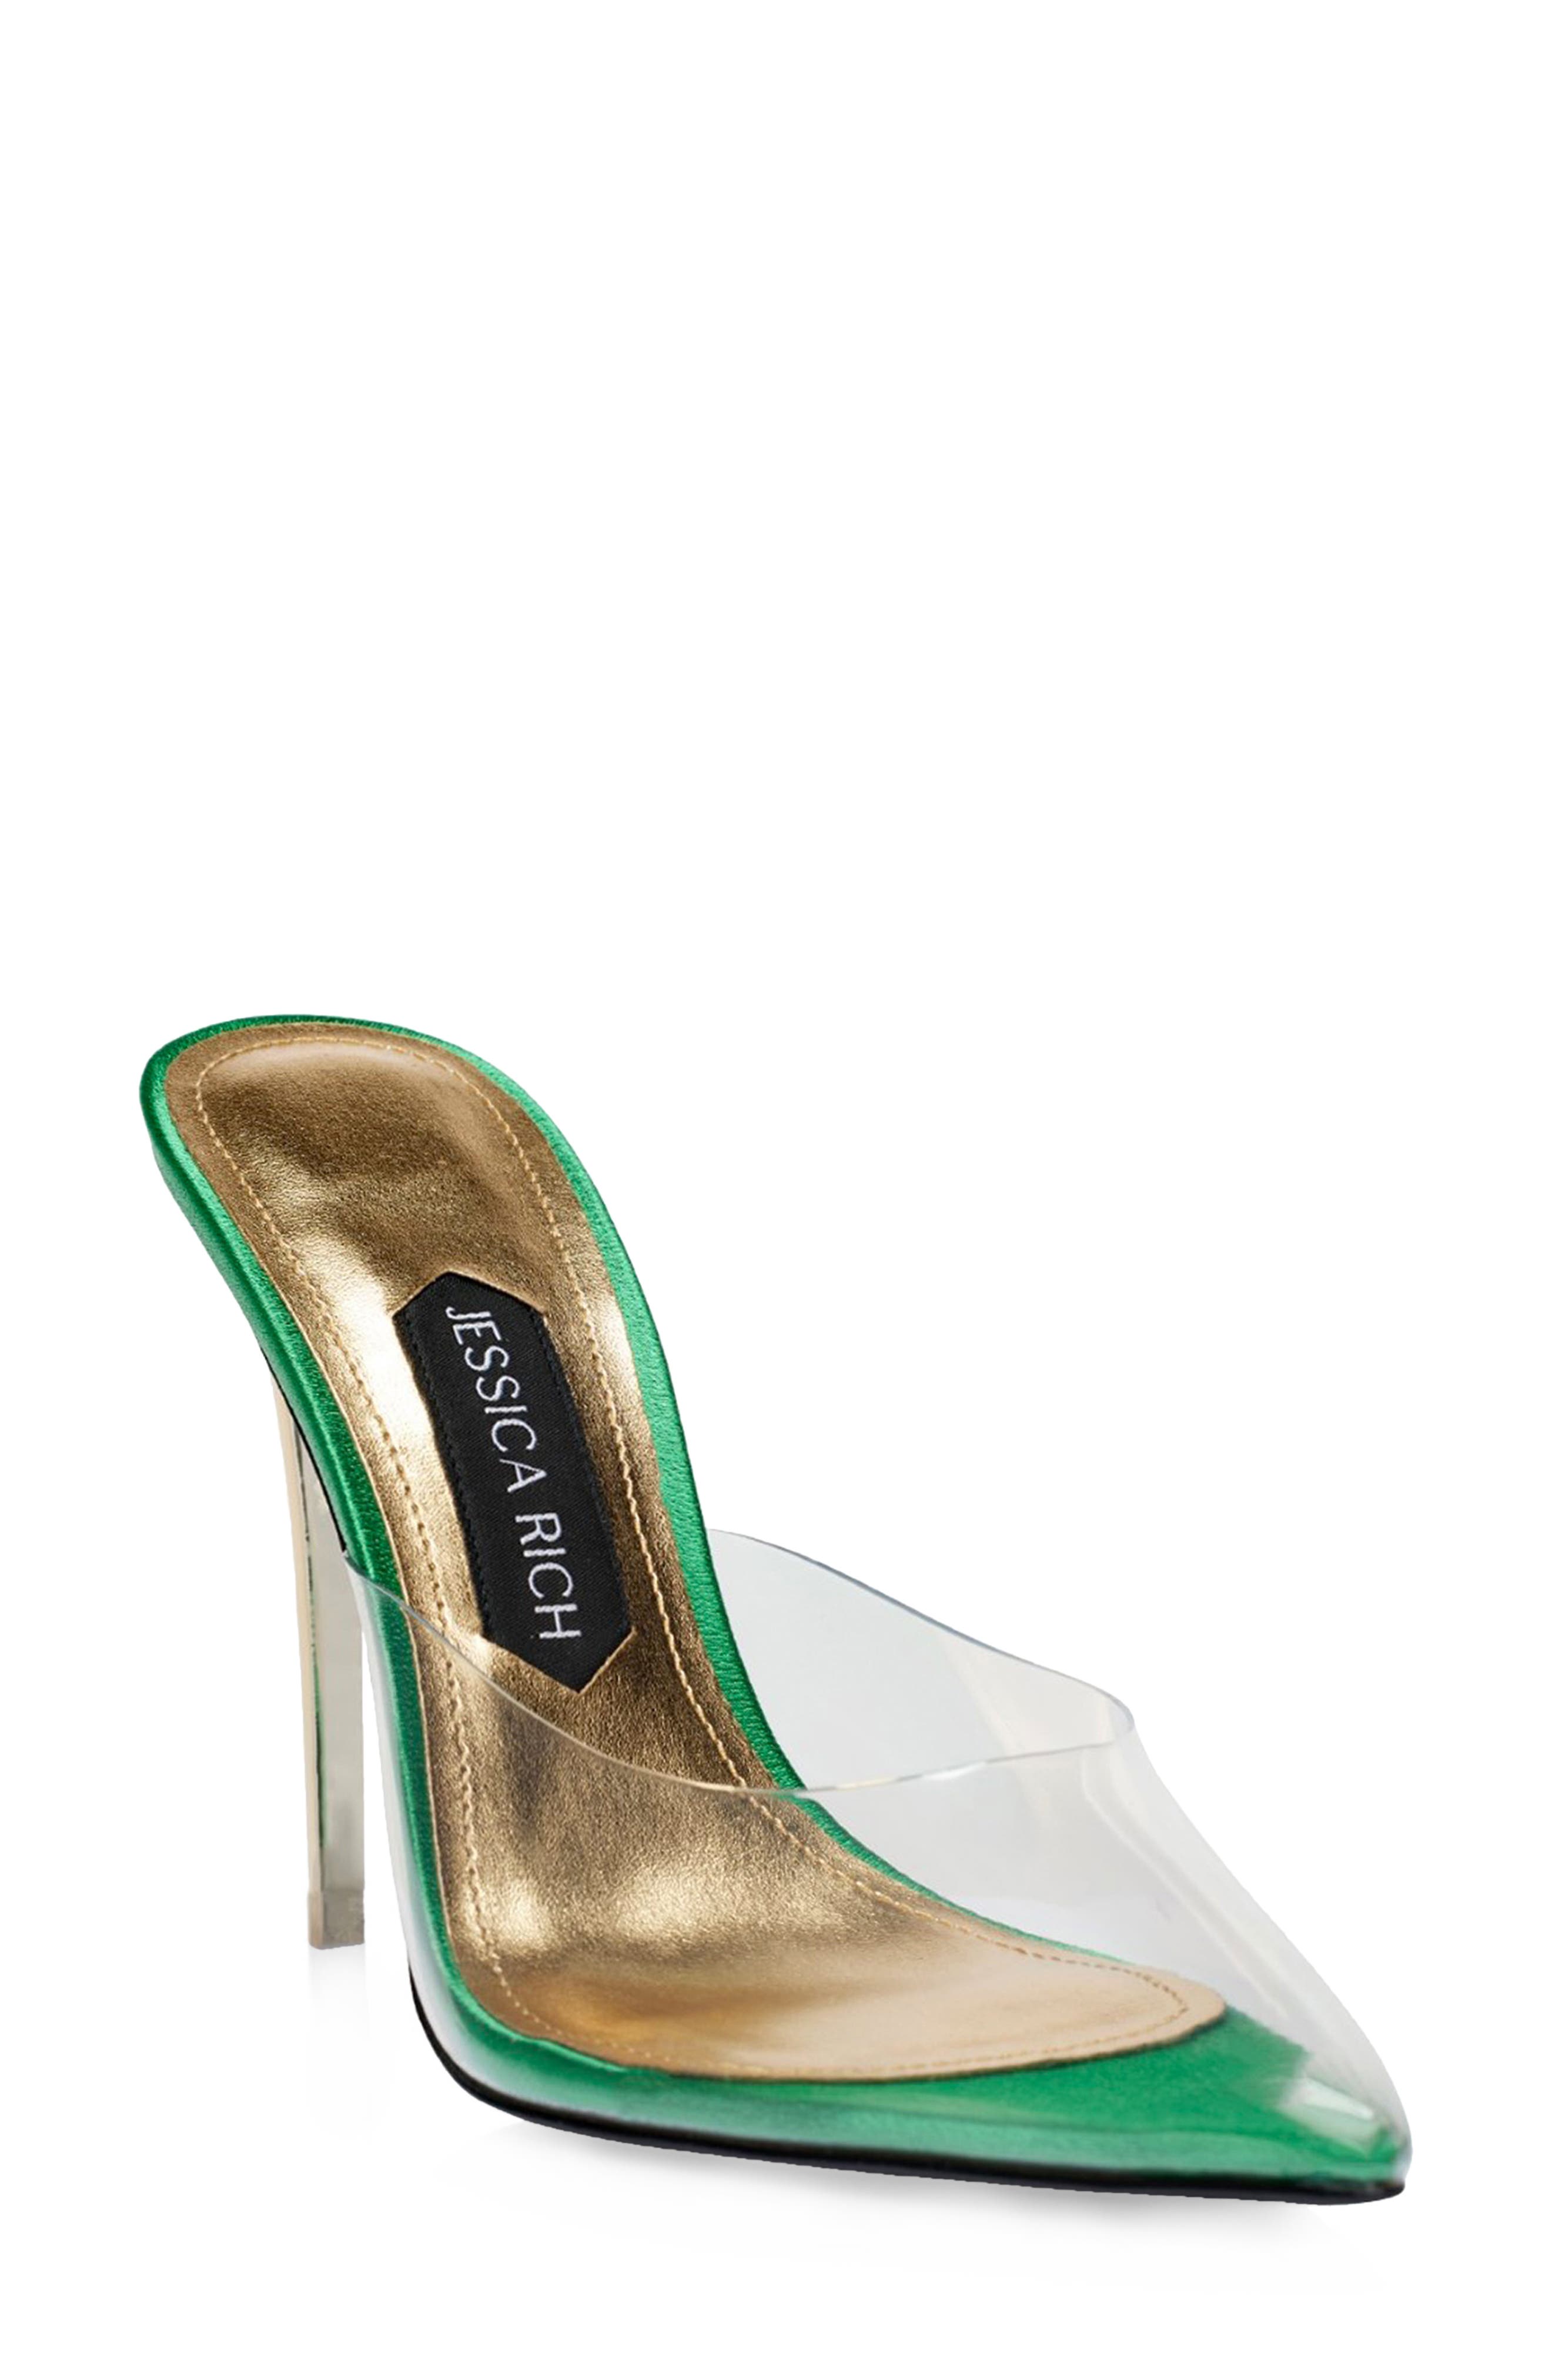 JESSICA RICH So Bossy Pointed Toe Pump in Green